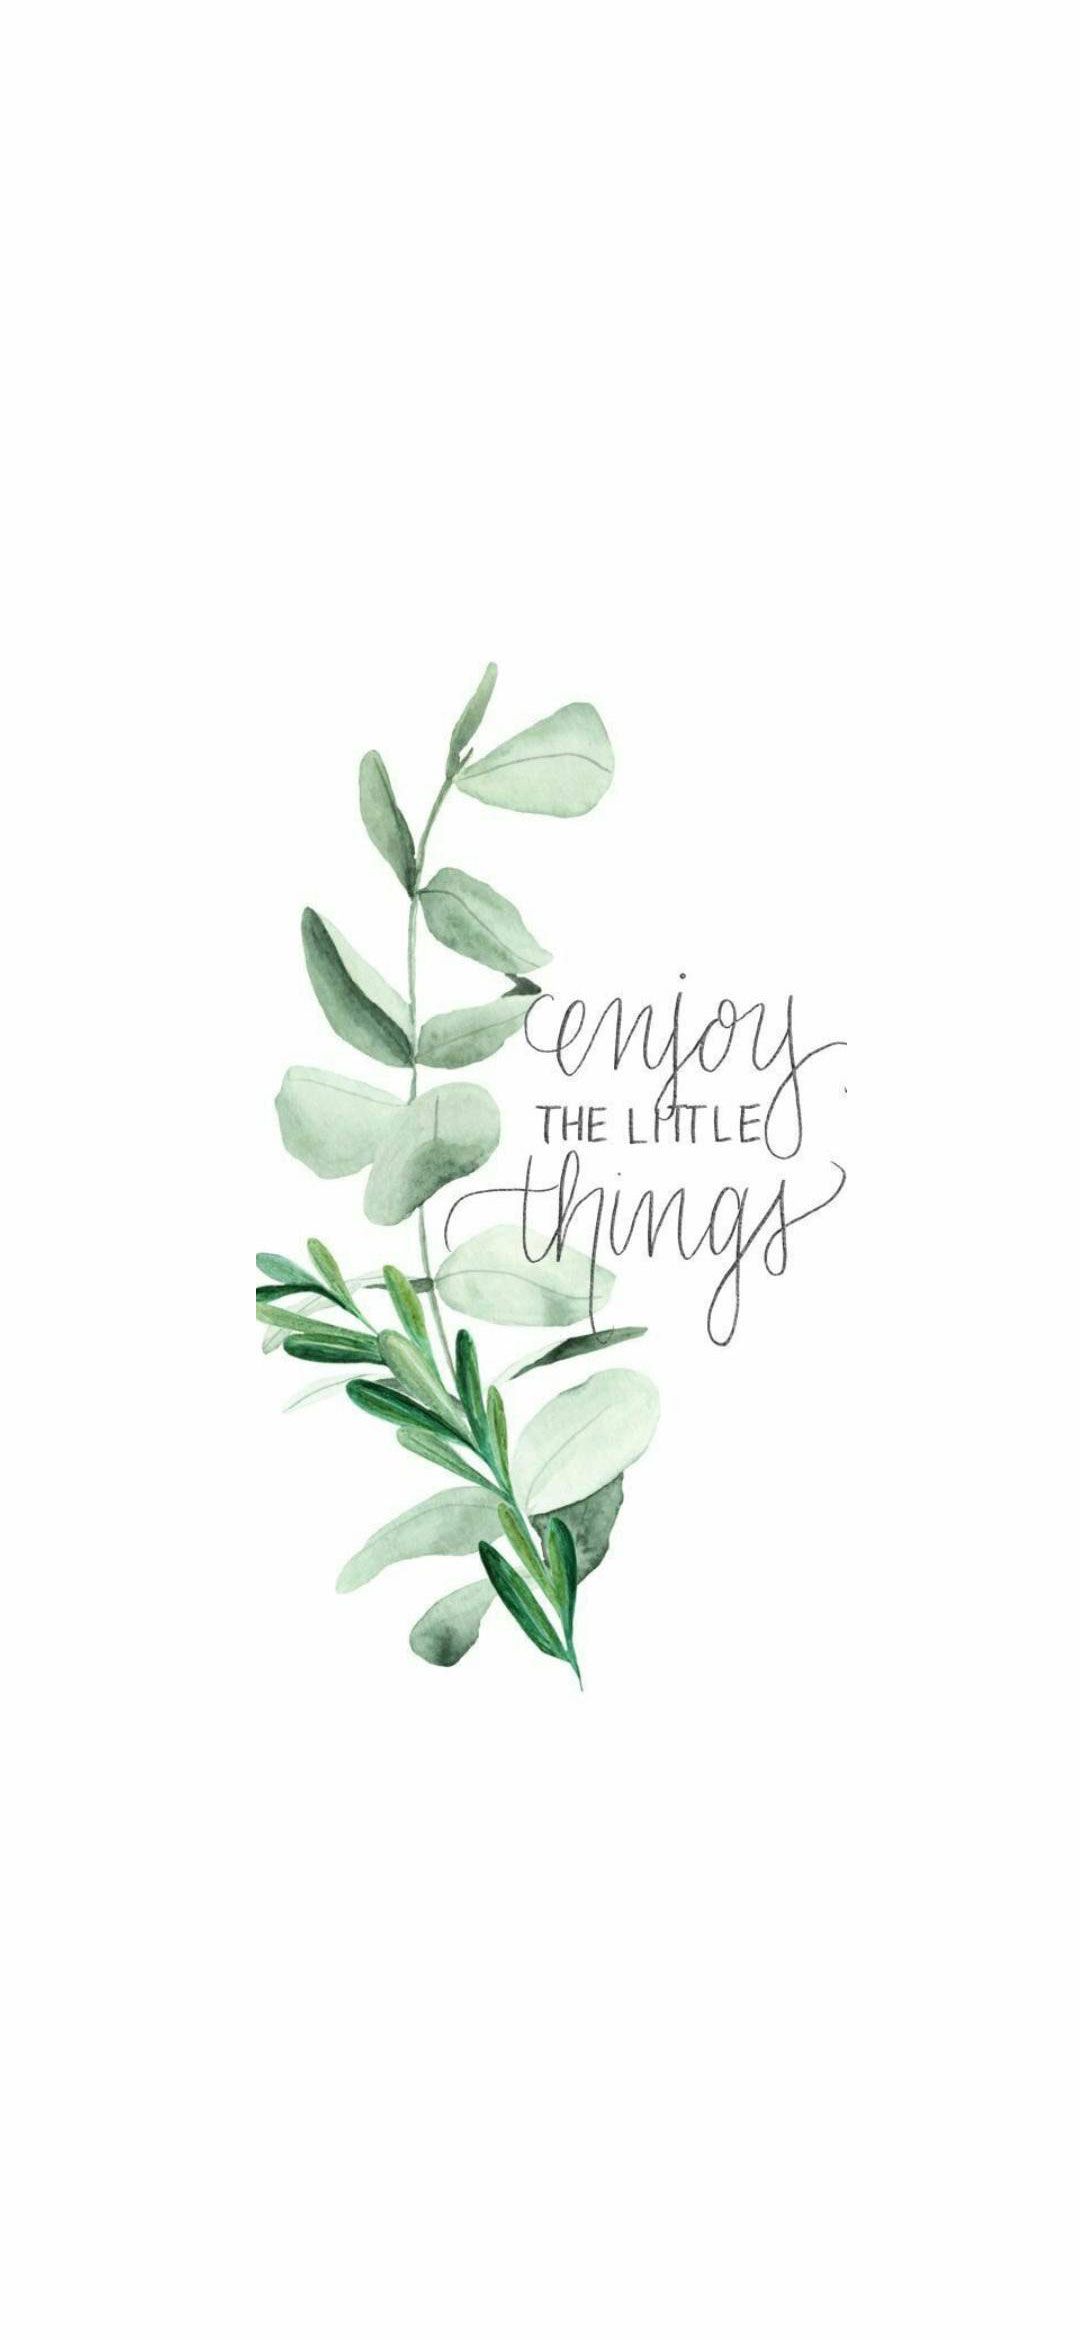 The Little Things Movie Poster Wallpapers